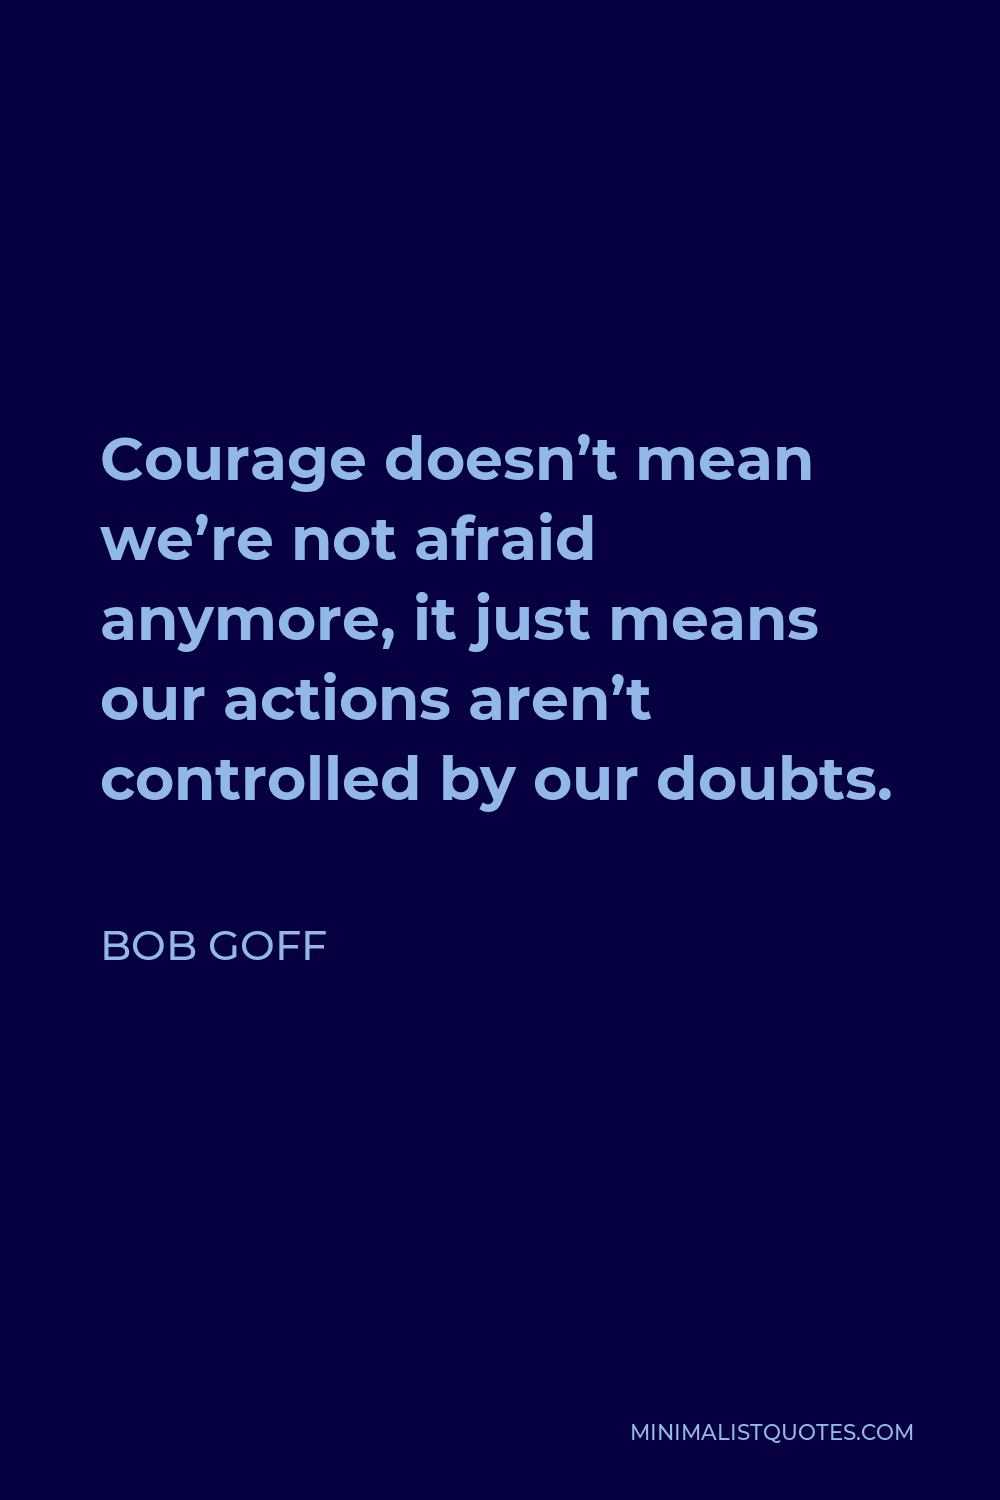 Bob Goff Quote - Courage doesn’t mean we’re not afraid anymore, it just means our actions aren’t controlled by our doubts.